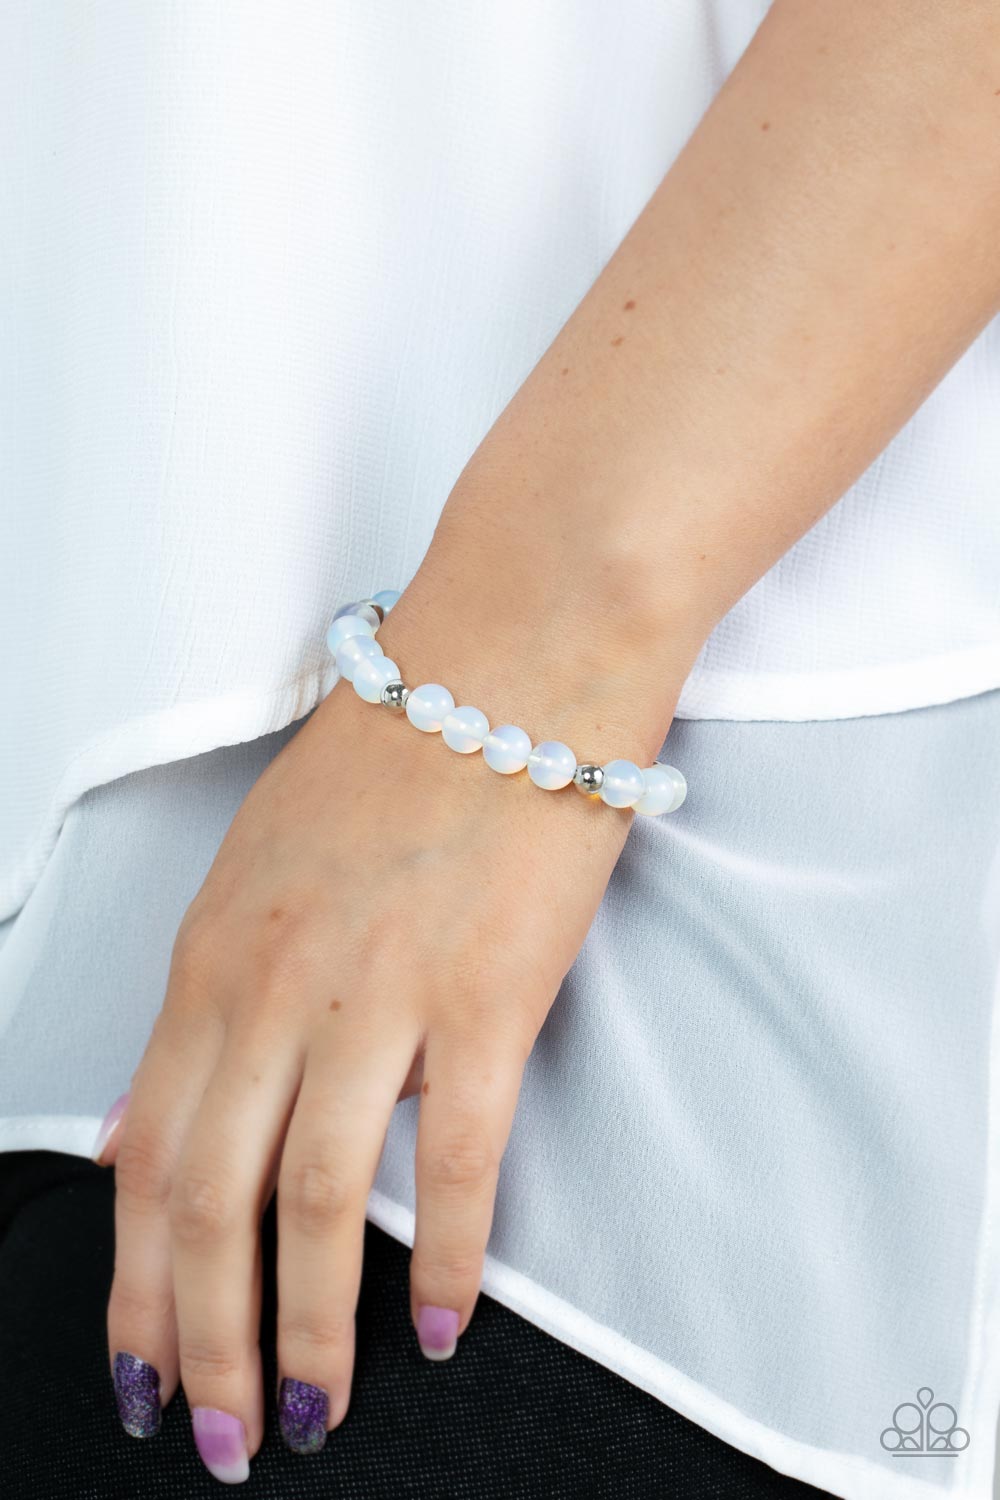 Forever and a DAYDREAM - White Glassy Bead - Stretchy Bracelet - Paparazzi Accessories - a dreamy collection of glassy and opalescent white beads are threaded along a stretchy band around the wrist for an enchanting glow.